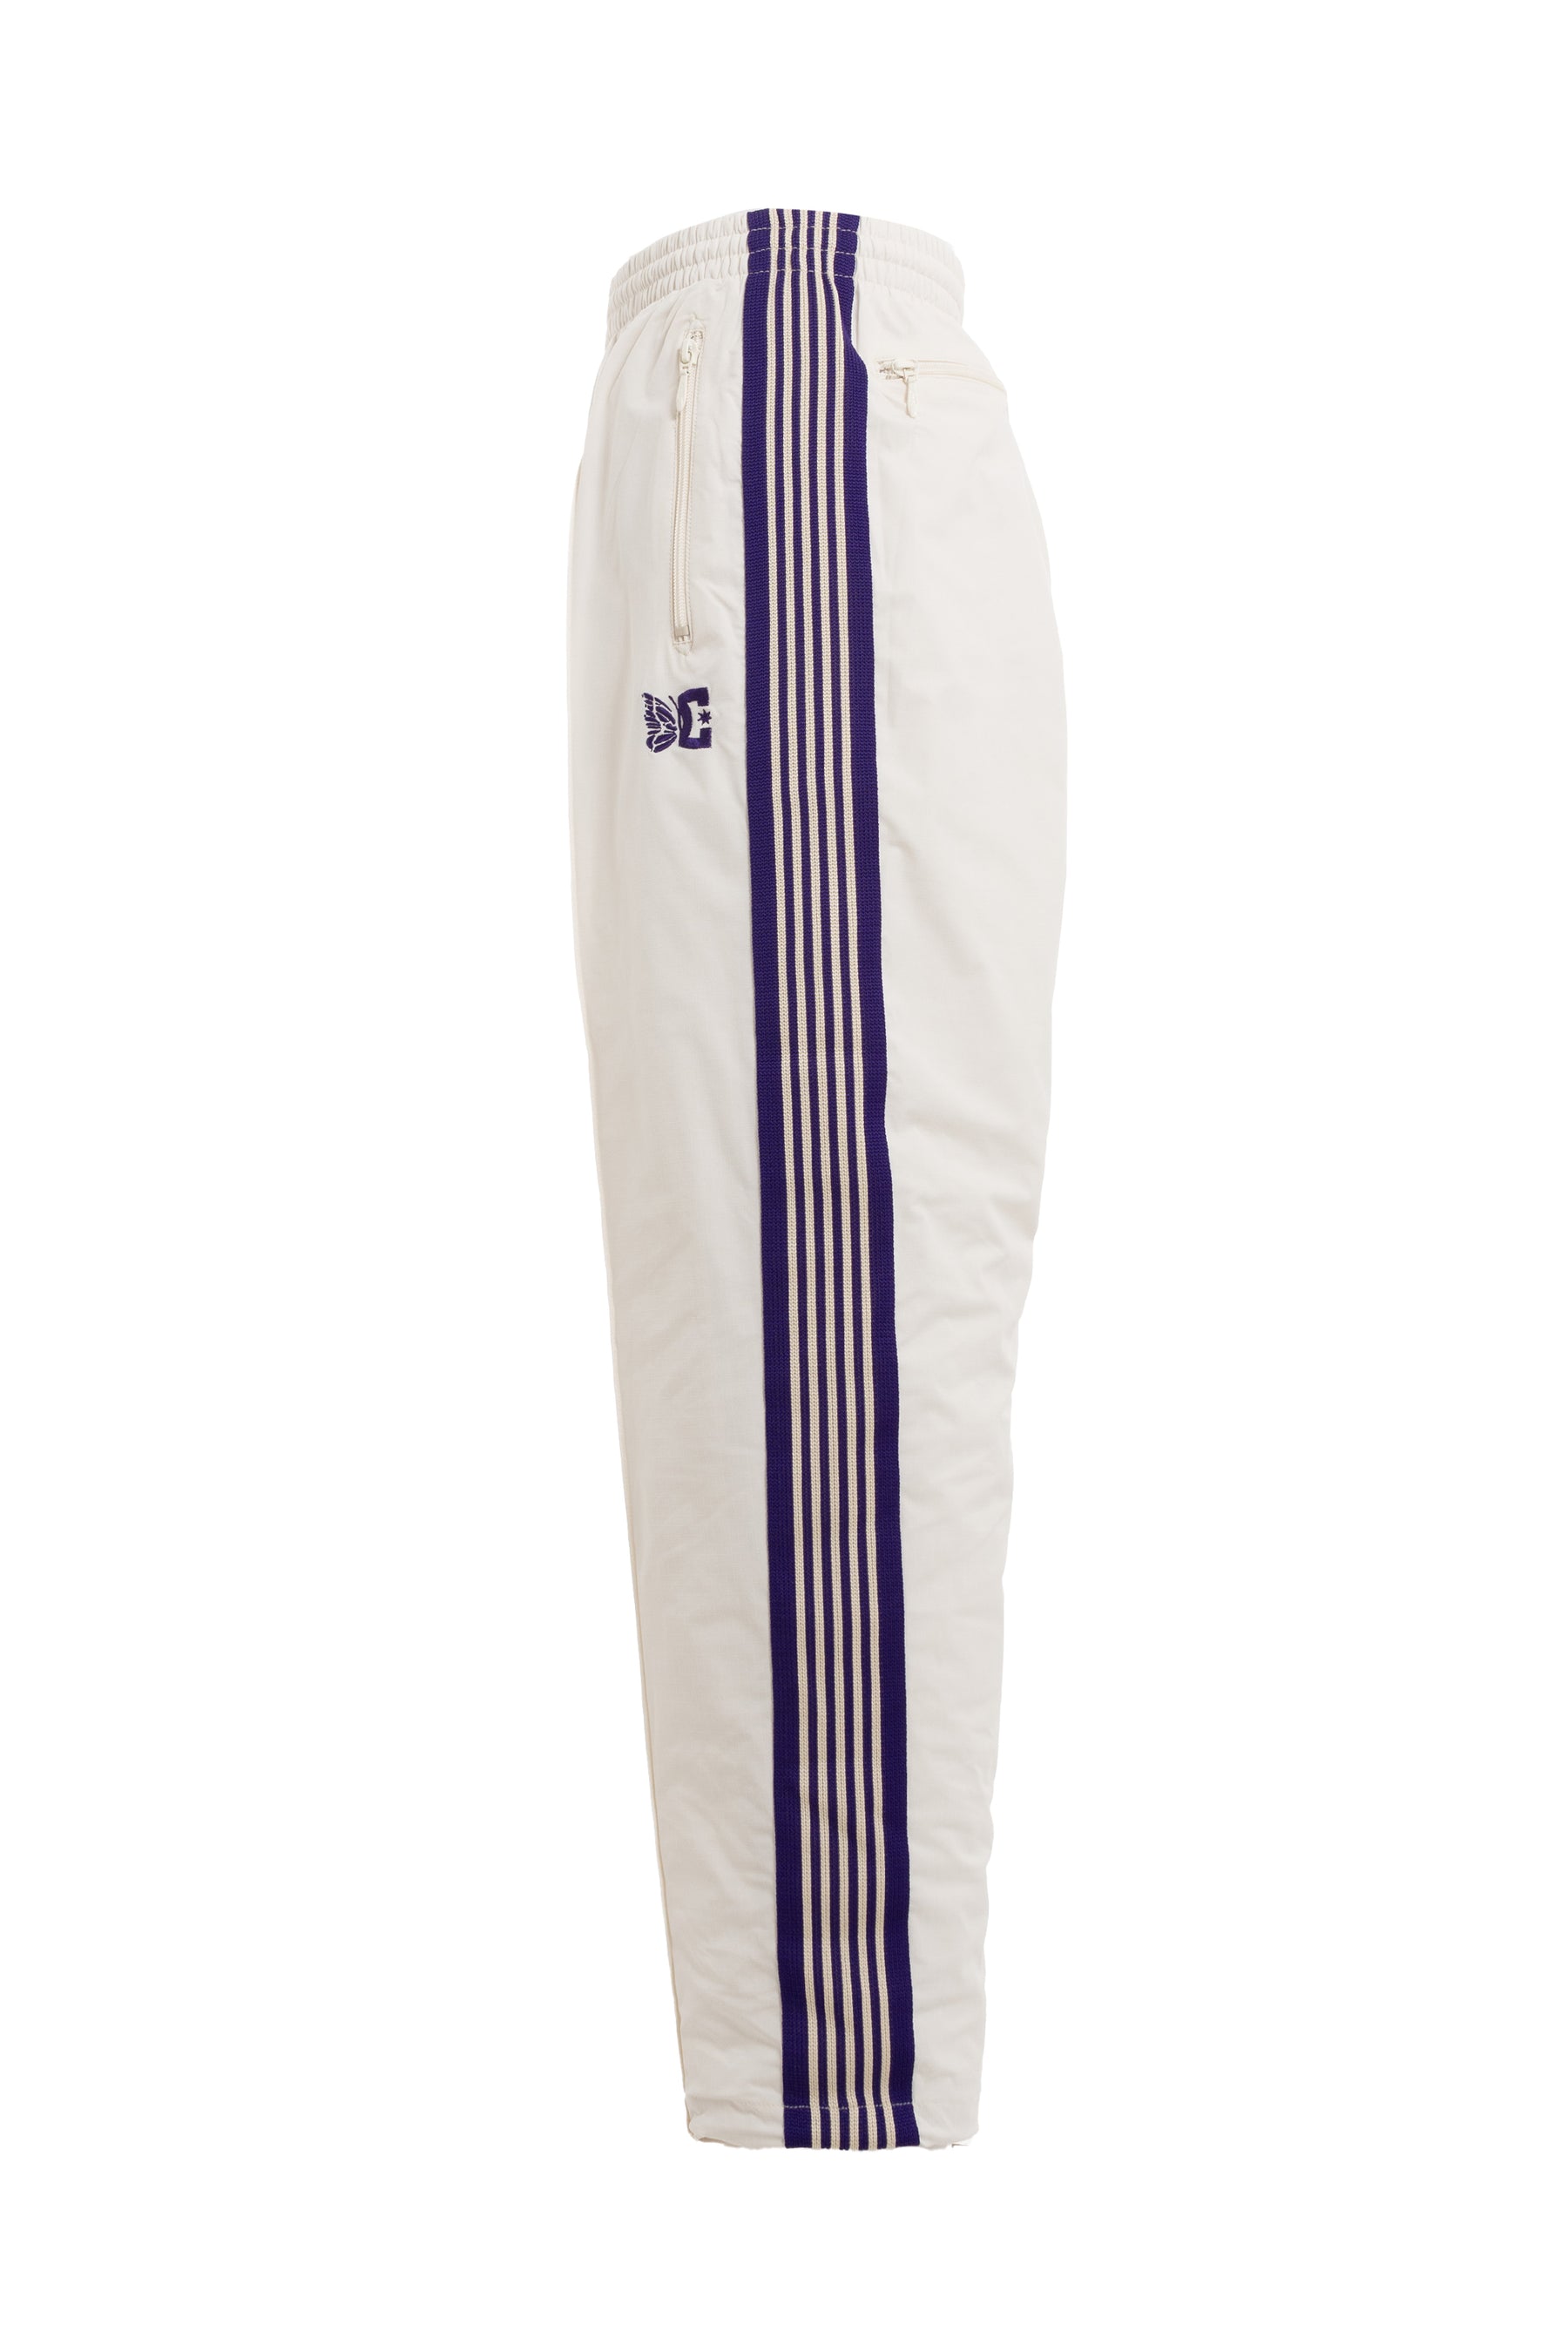 TRACK PANT - POLY RIPSTOP / IVORY